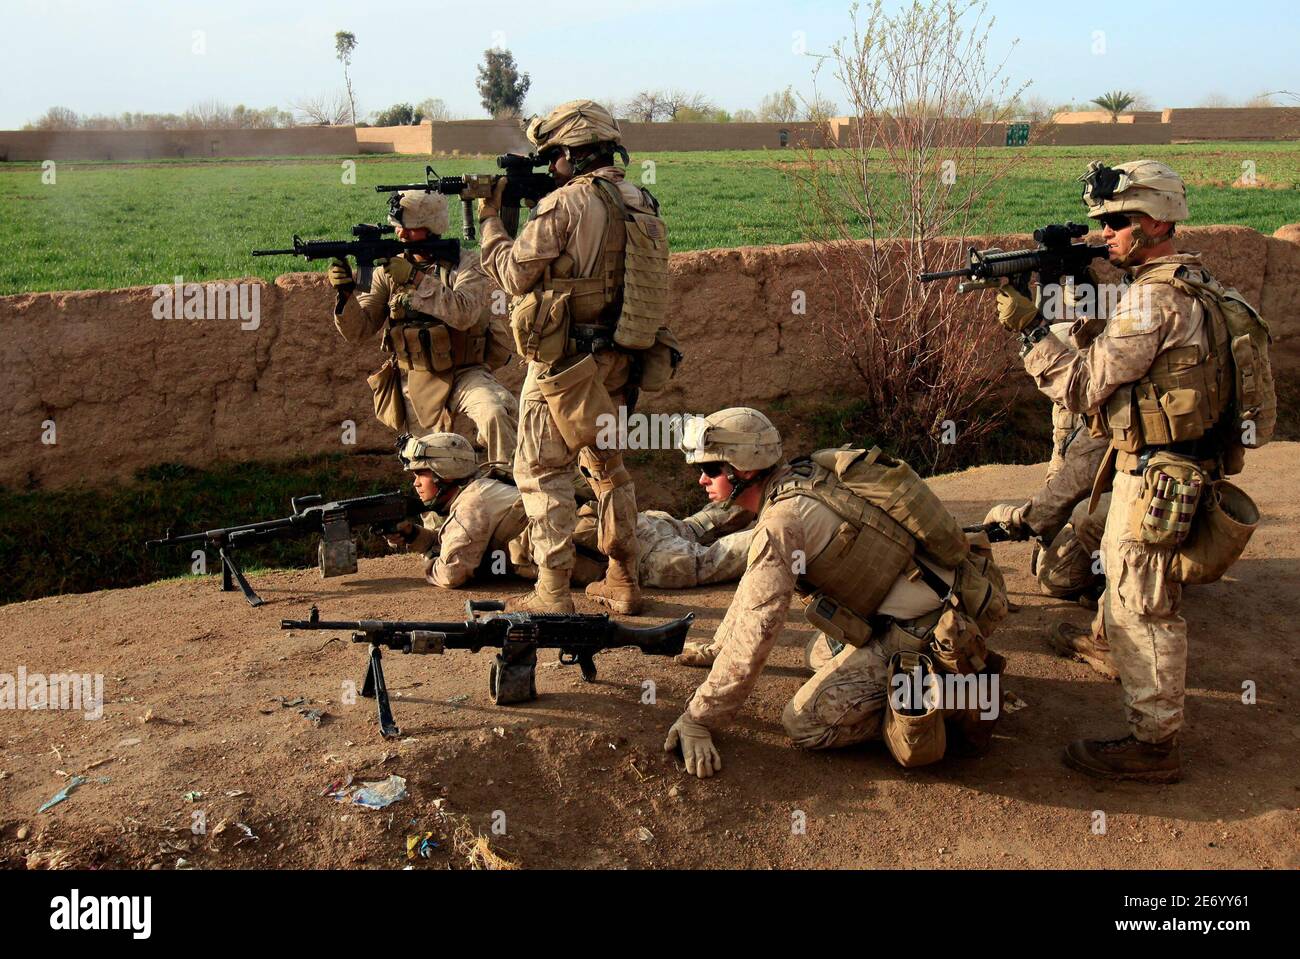 U.S. Marines from Bravo Company of the 1st Battalion, 6th Marines fire their weapons at Taliban fighters in Marjah, Helmand province February 22, 2010.   REUTERS/Goran Tomasevic  (AFGHANISTAN Tags: - Tags: MILITARY CONFLICT) Stock Photo